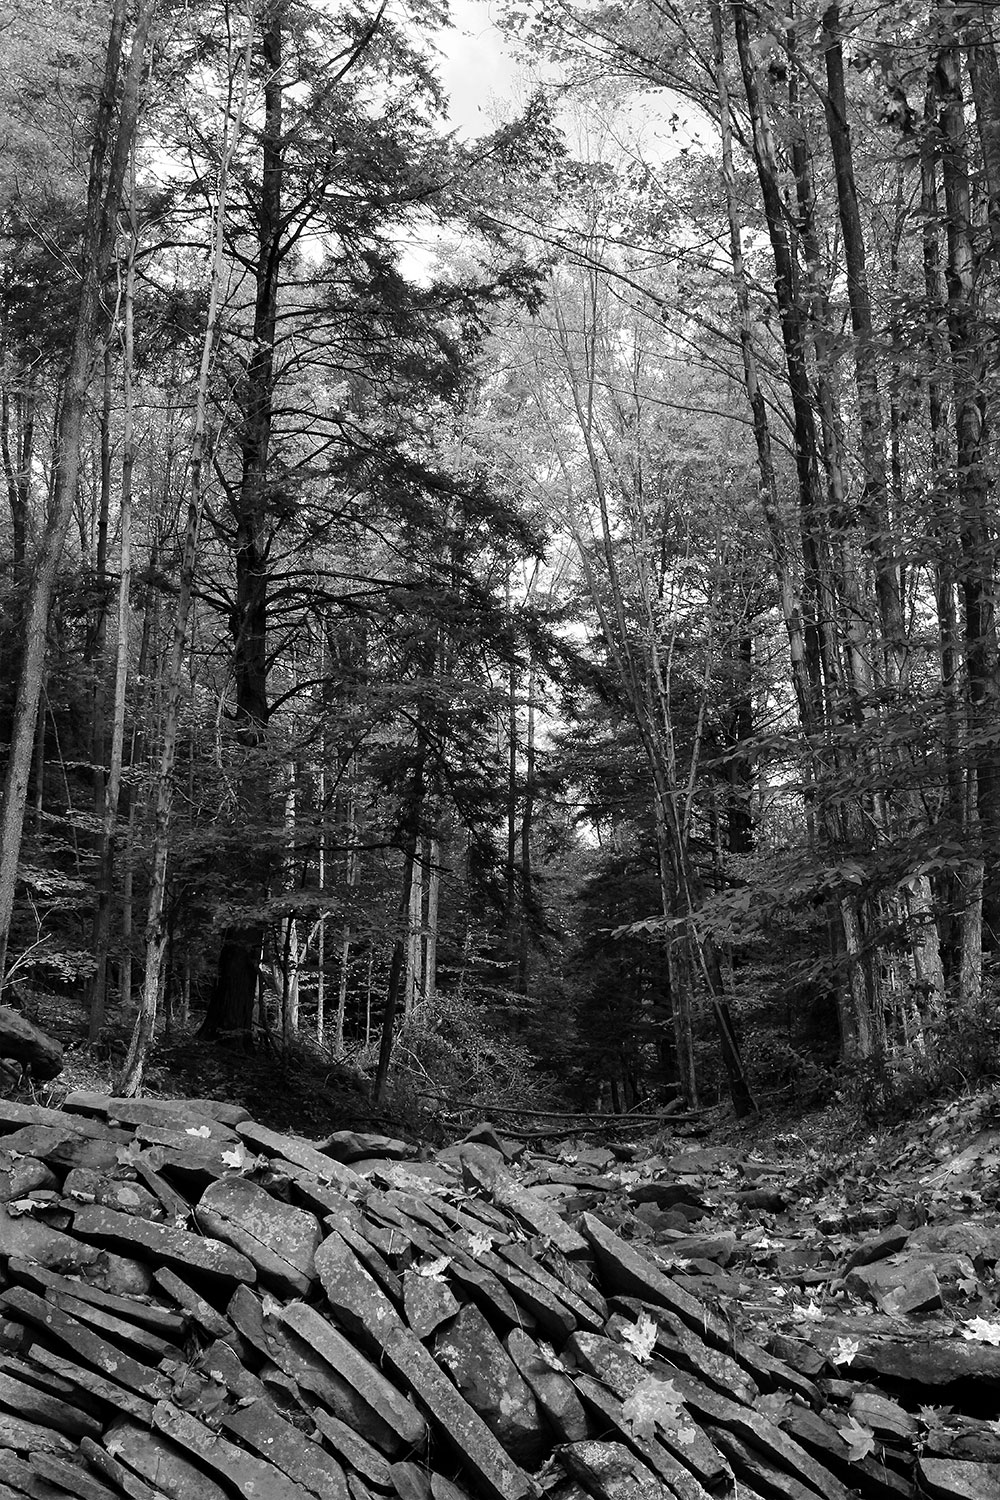 Black and white image of stone creek bed in the foreground and forest in the background